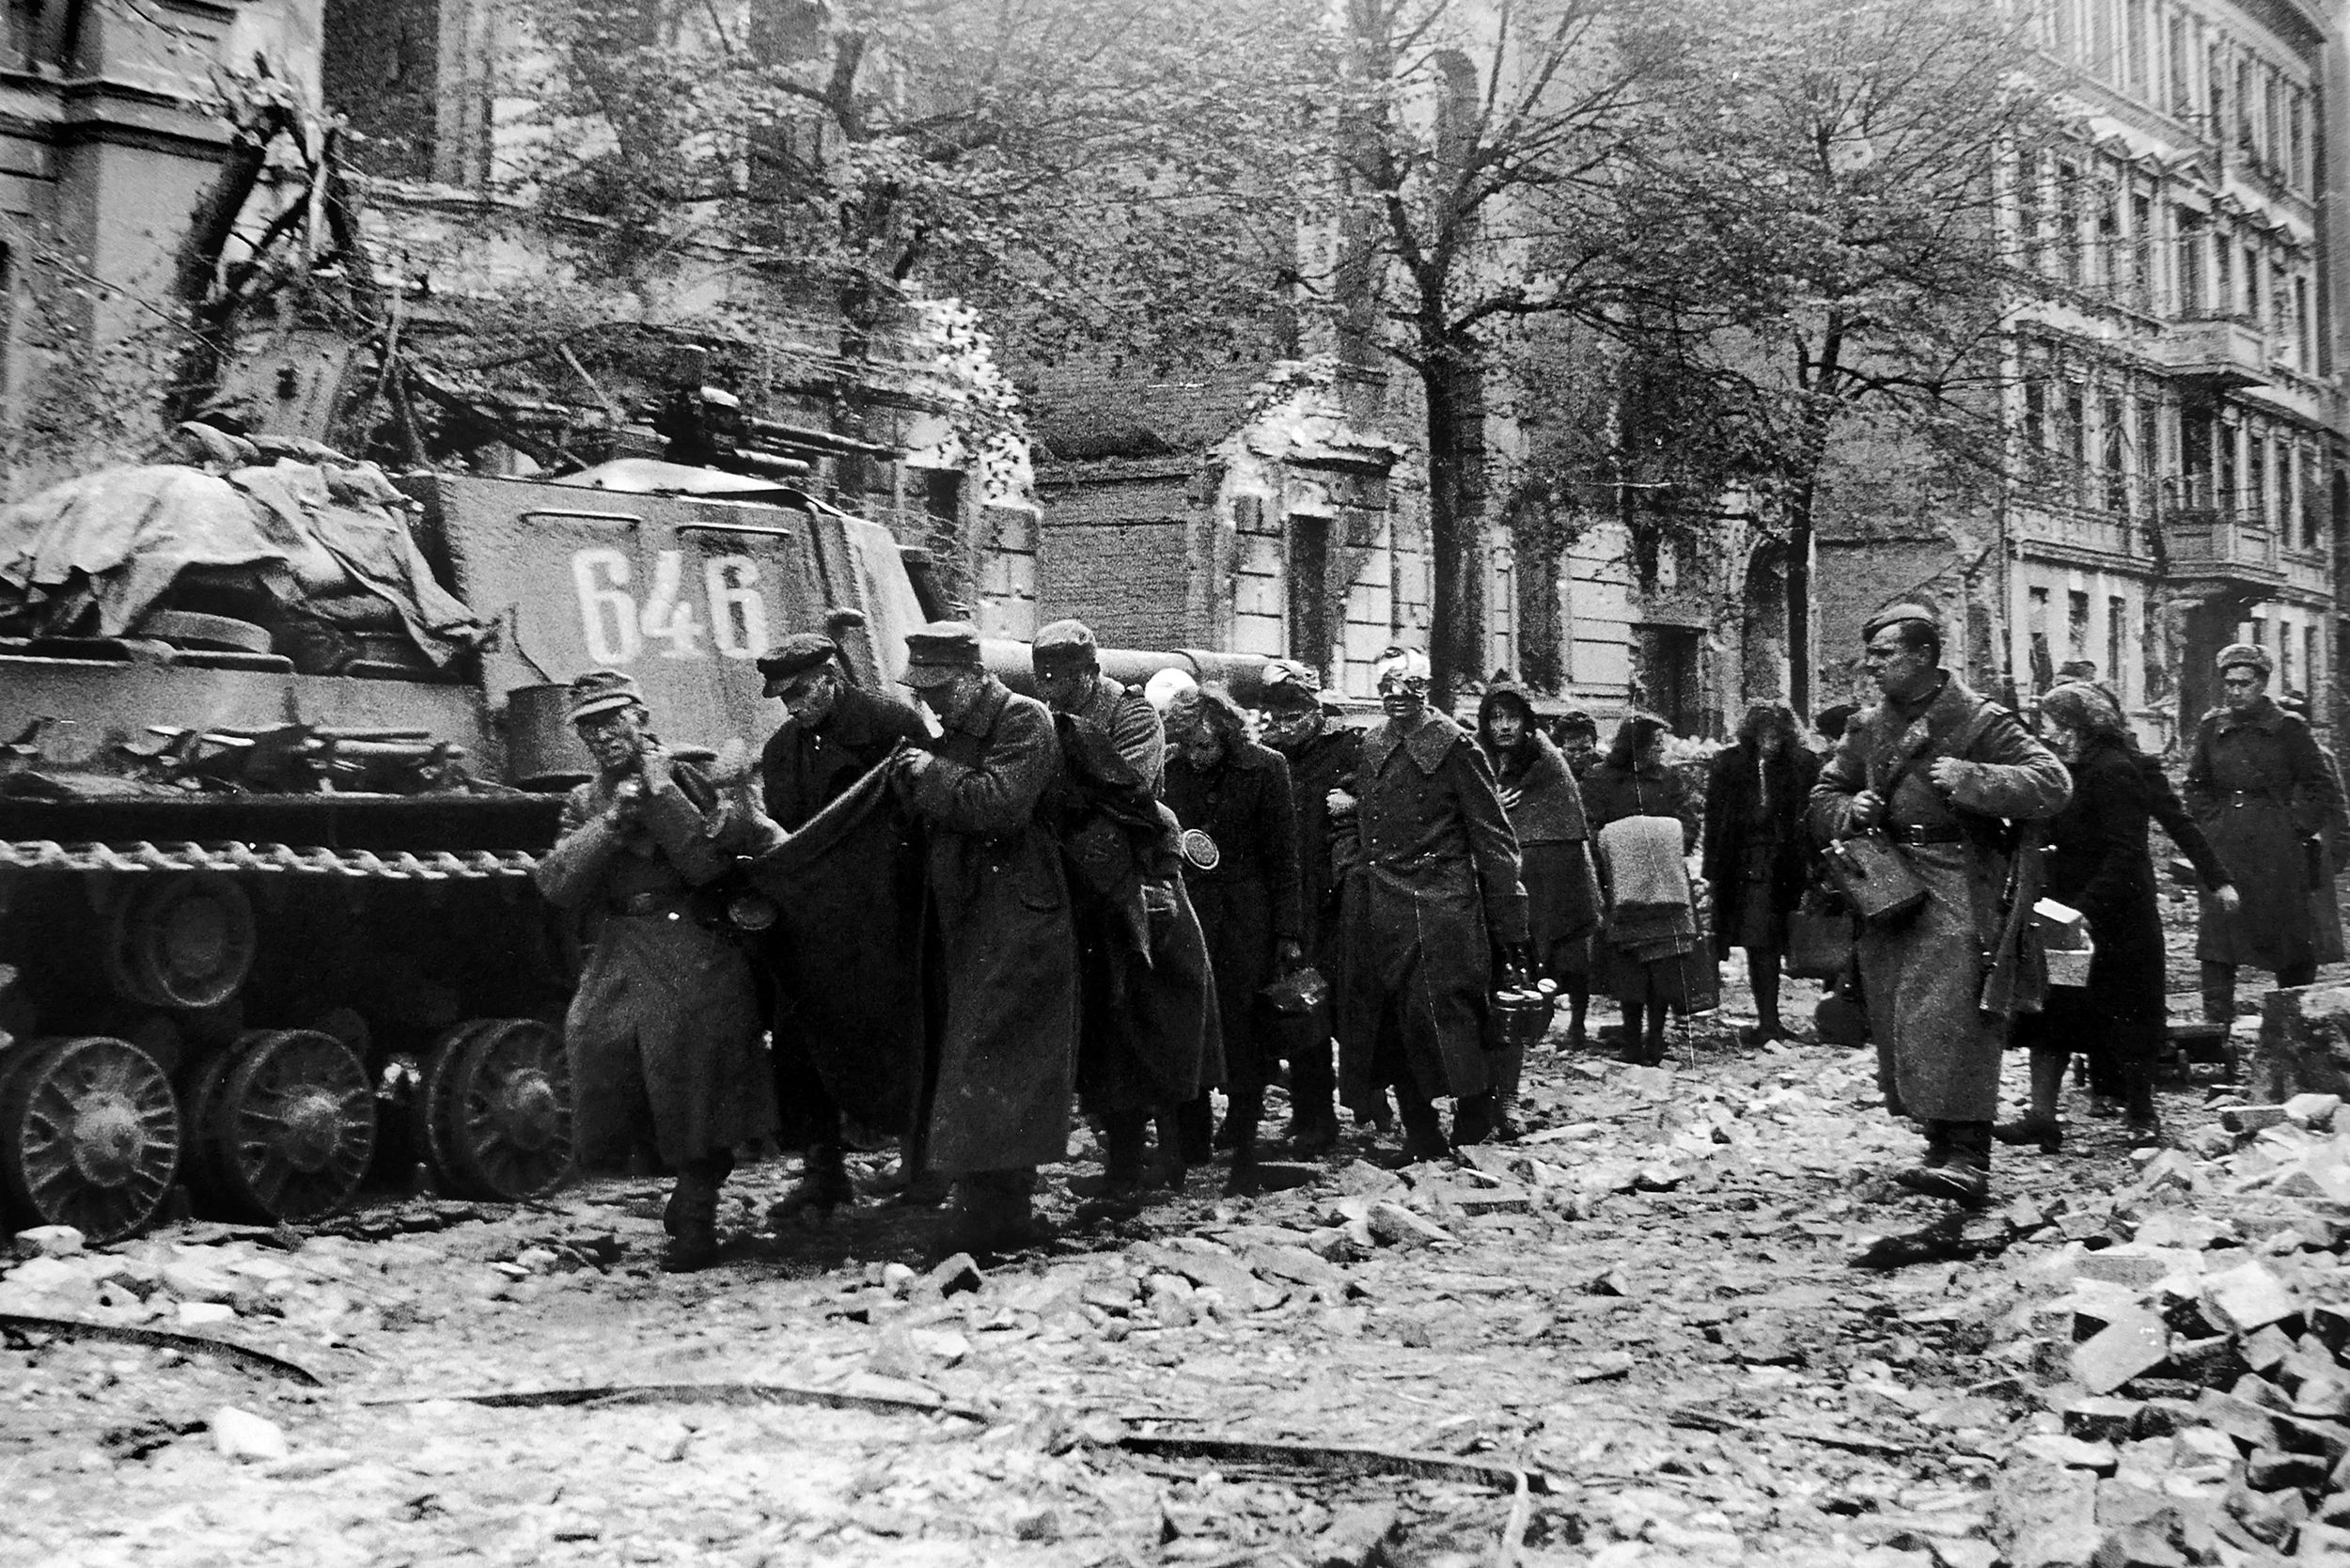 German prisoners carry a wounded comrade in a blanket as they make their way down a Berlin street in the spring of 1945. These captives are walking past a Soviet ISU-152 self-propelled gun.